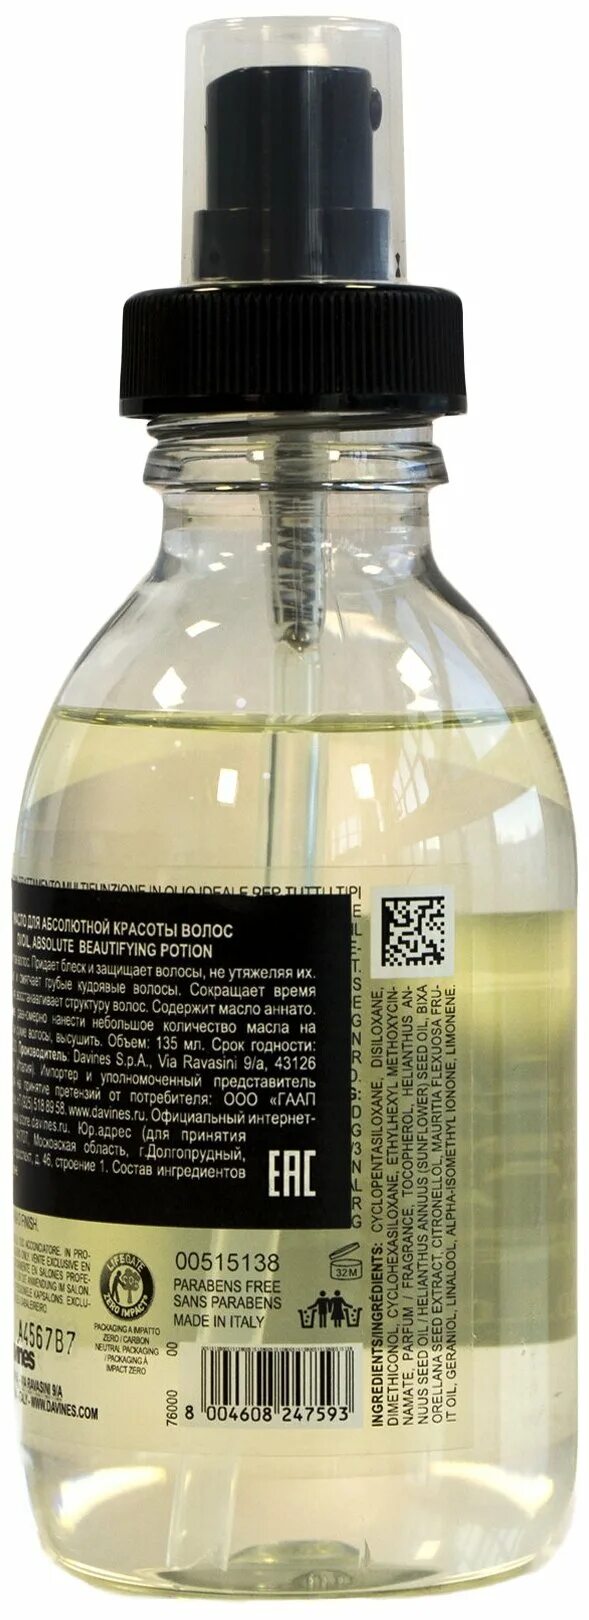 Davines oi absolute beautifying. Davines масло для волос oi Oil absolute Beautifying Potion 135 мл. Davines oi Oil 50 ml. Oi Oil Davines масло. Масло Davines Oil "absolute Beautifying Potion" для абсолютной красоты волос 50 мл.